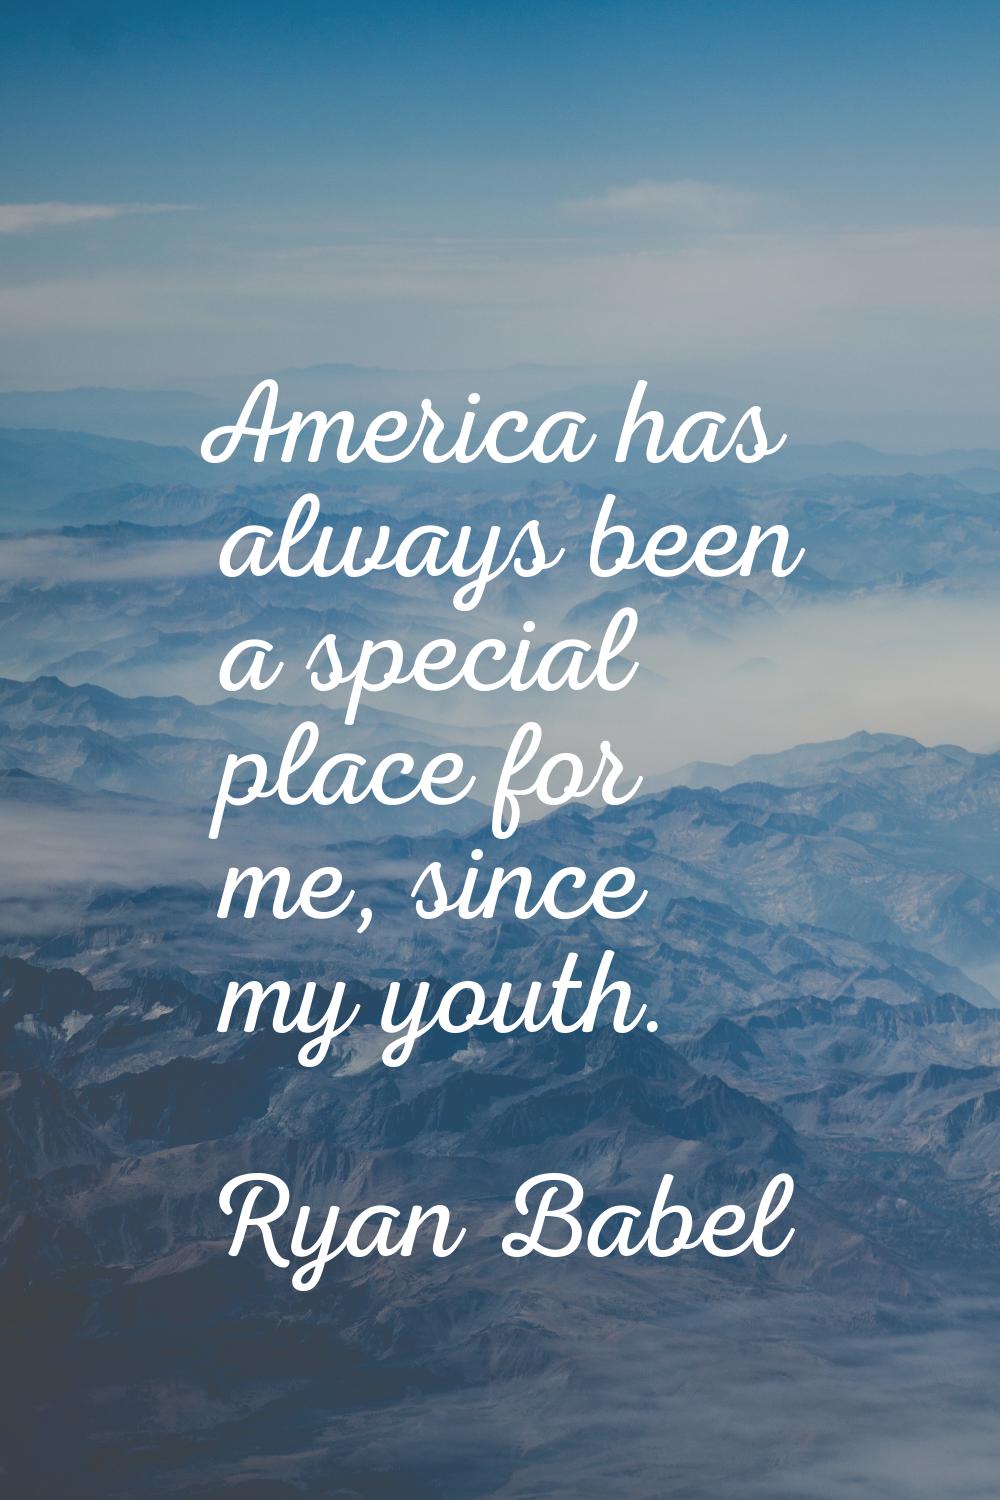 America has always been a special place for me, since my youth.